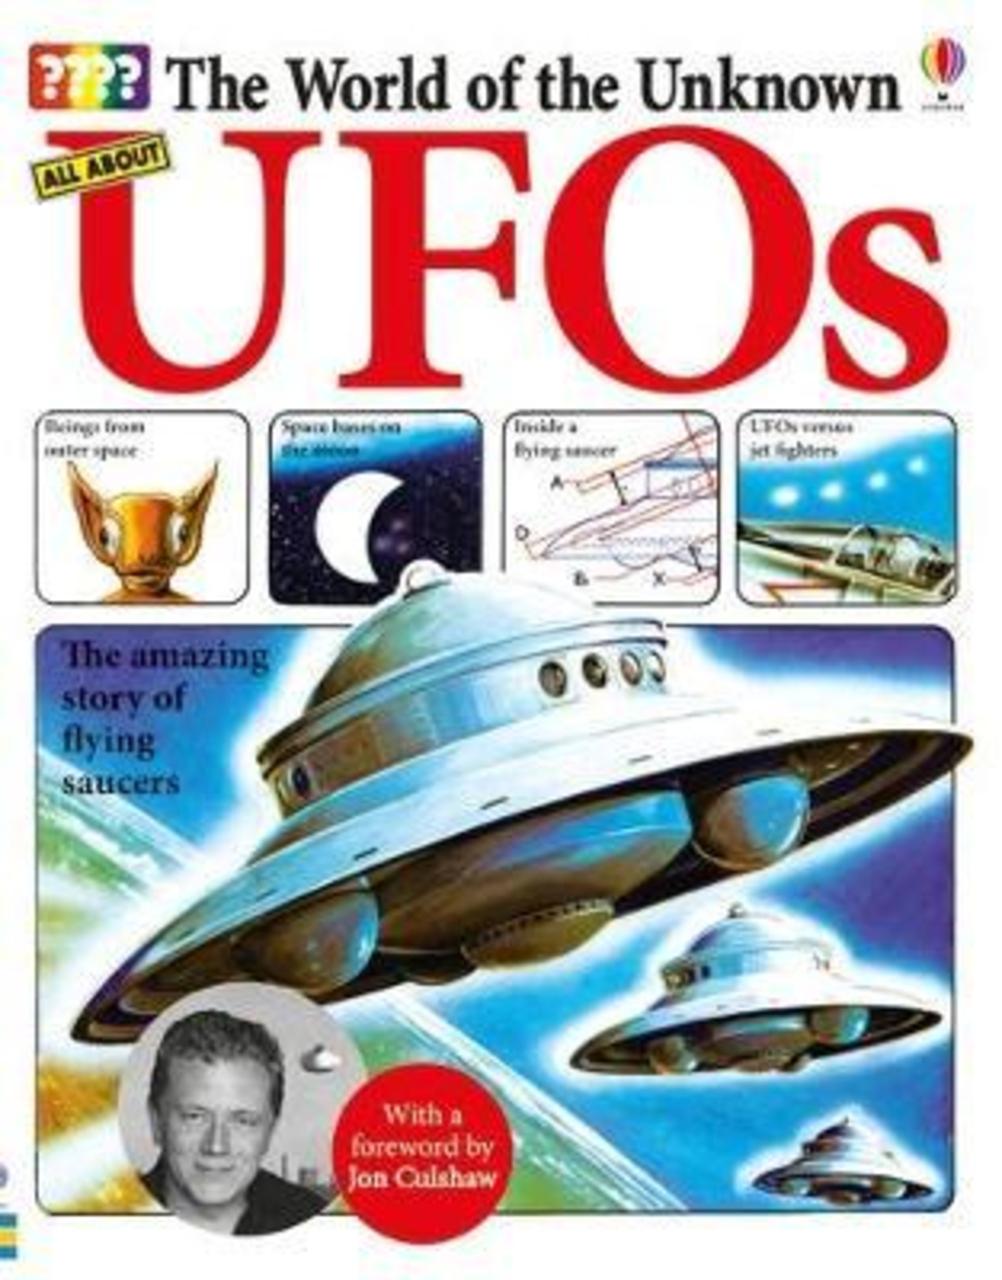 Sách - The World of the Unknown: UFOs by Ted Wilding-White Various (UK edition, paperback)